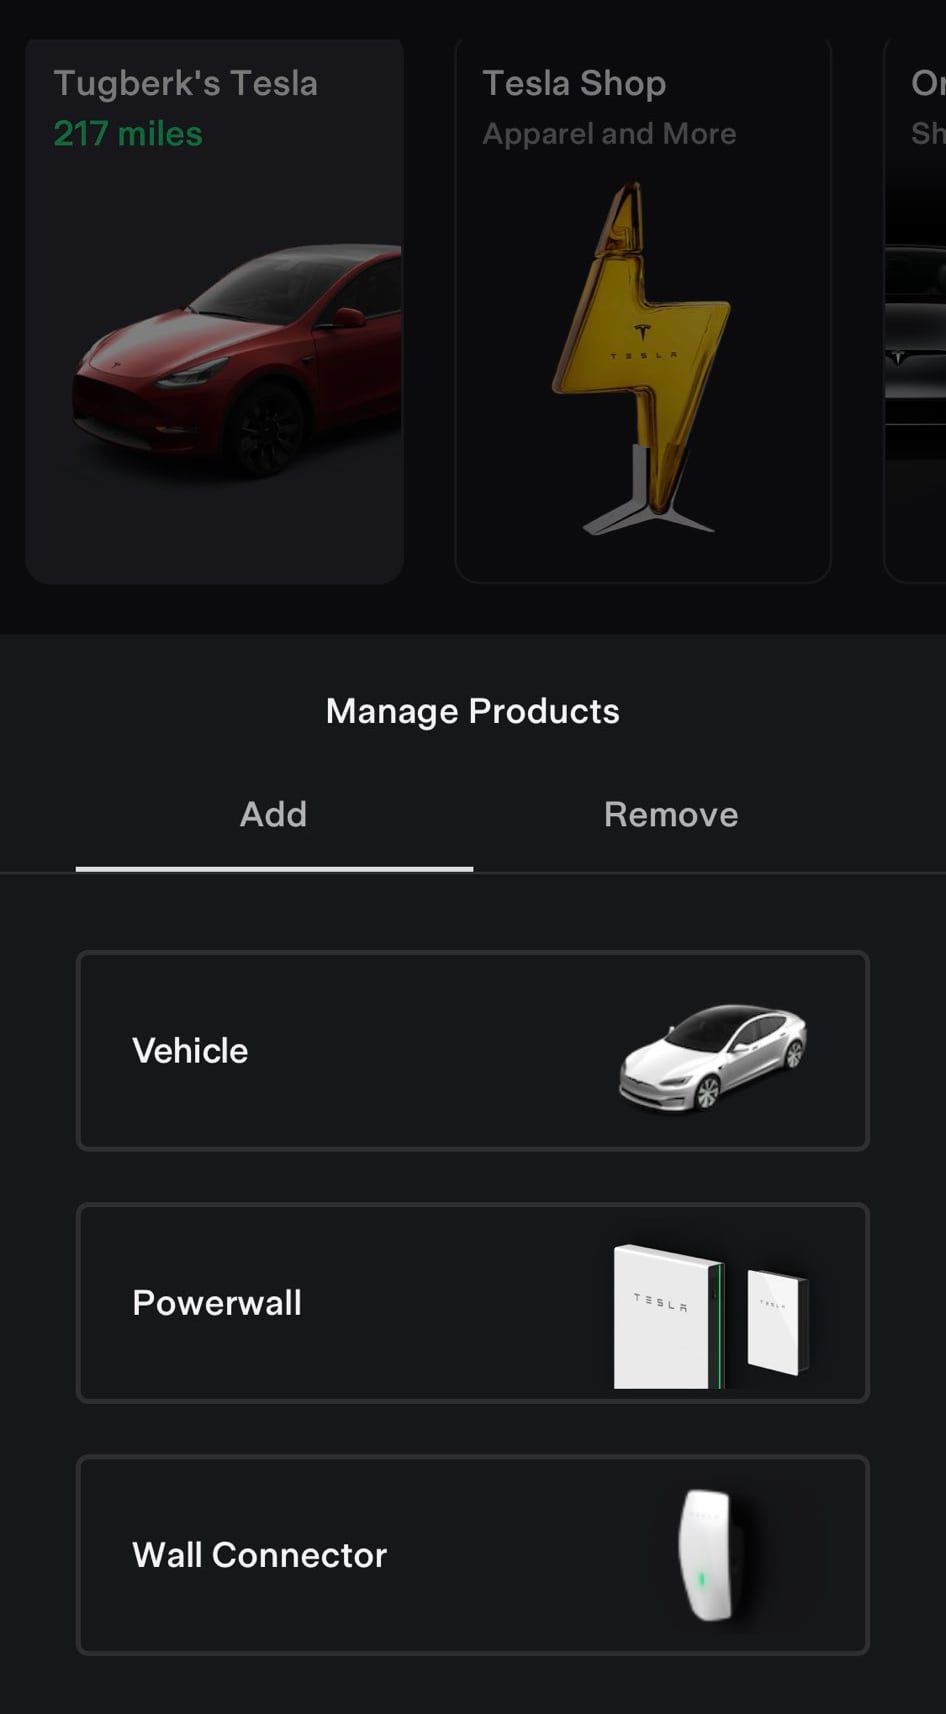 Tesla is letting your connect your Wall Connector to the app